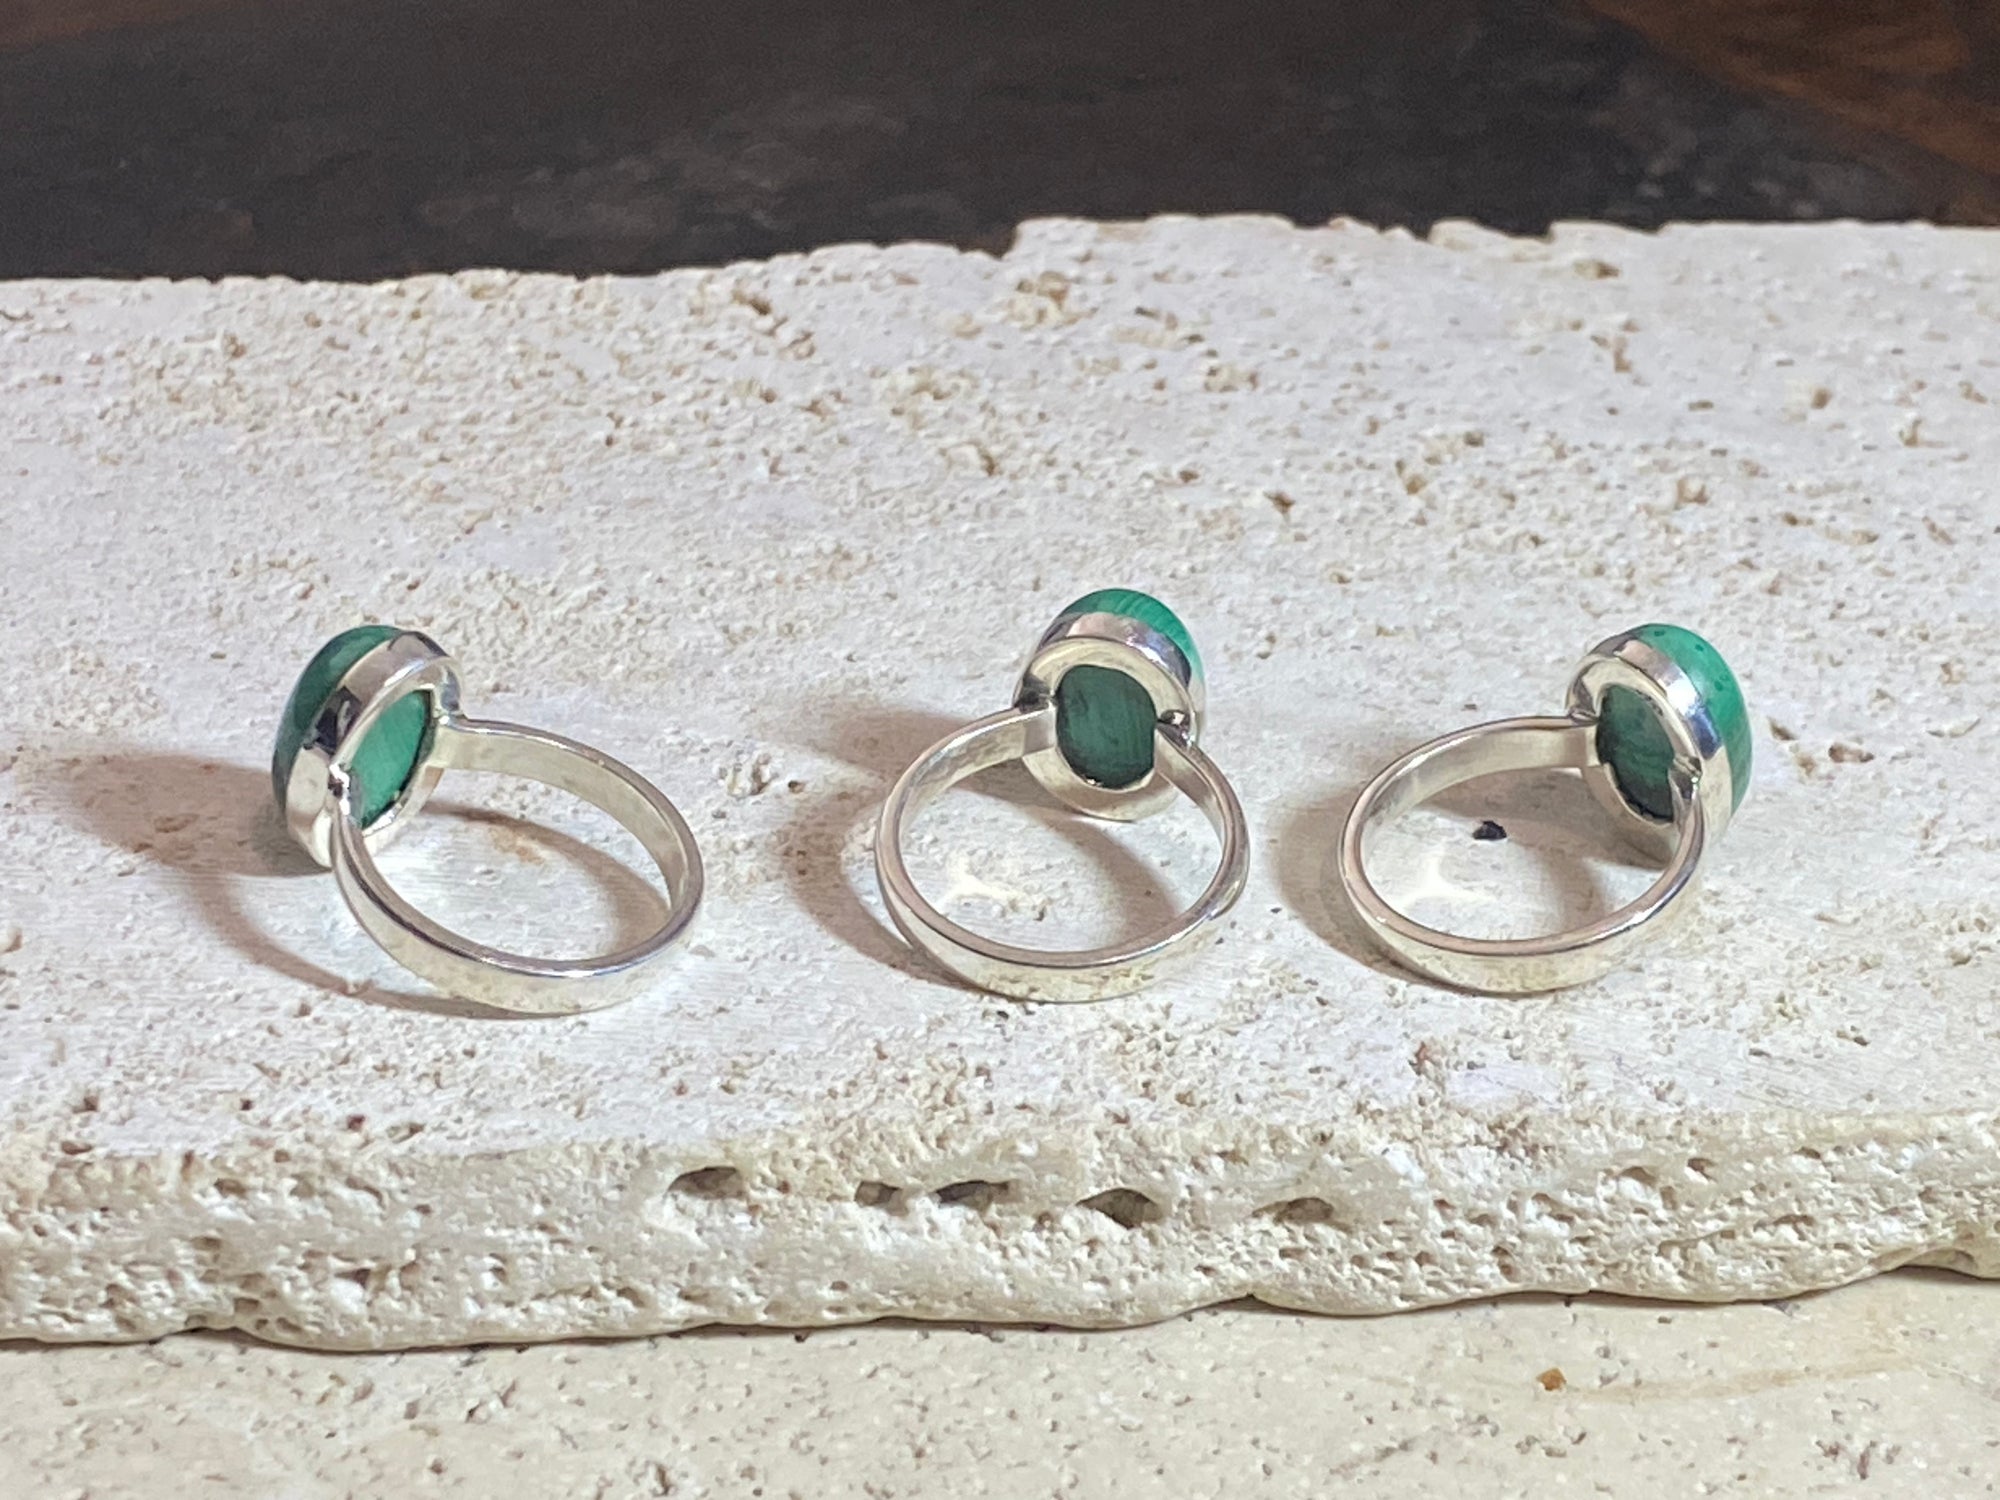 Oval malachite rings set in sterling silver. sizes 7 - 7.5